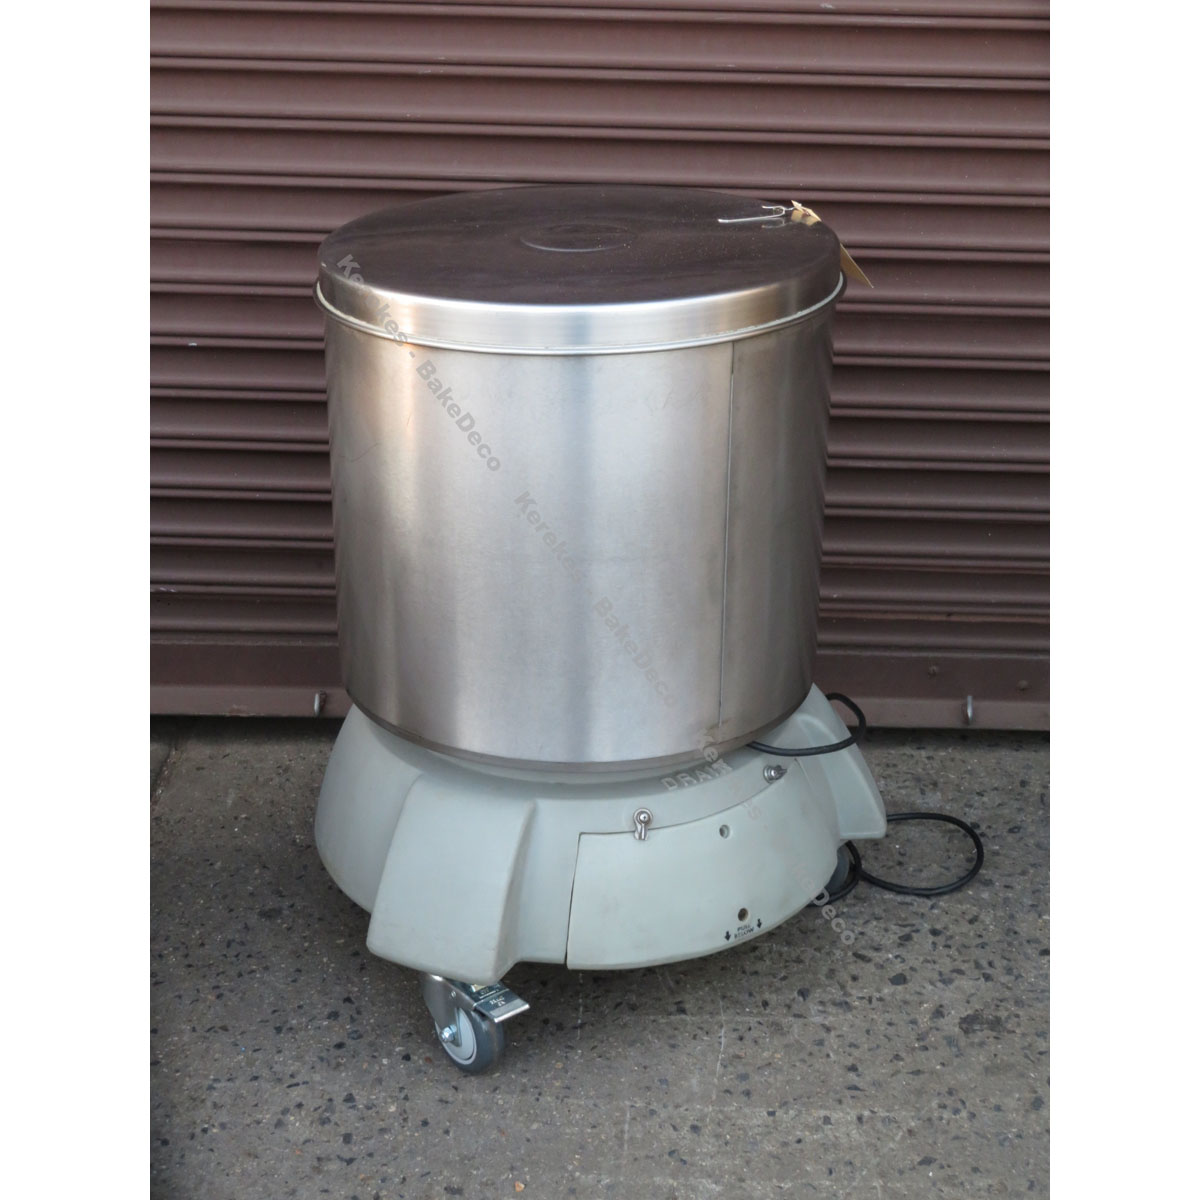 Electrolux VP1 20 Gallon Salad Spinner Dryer, Used Excellent Condition image 1